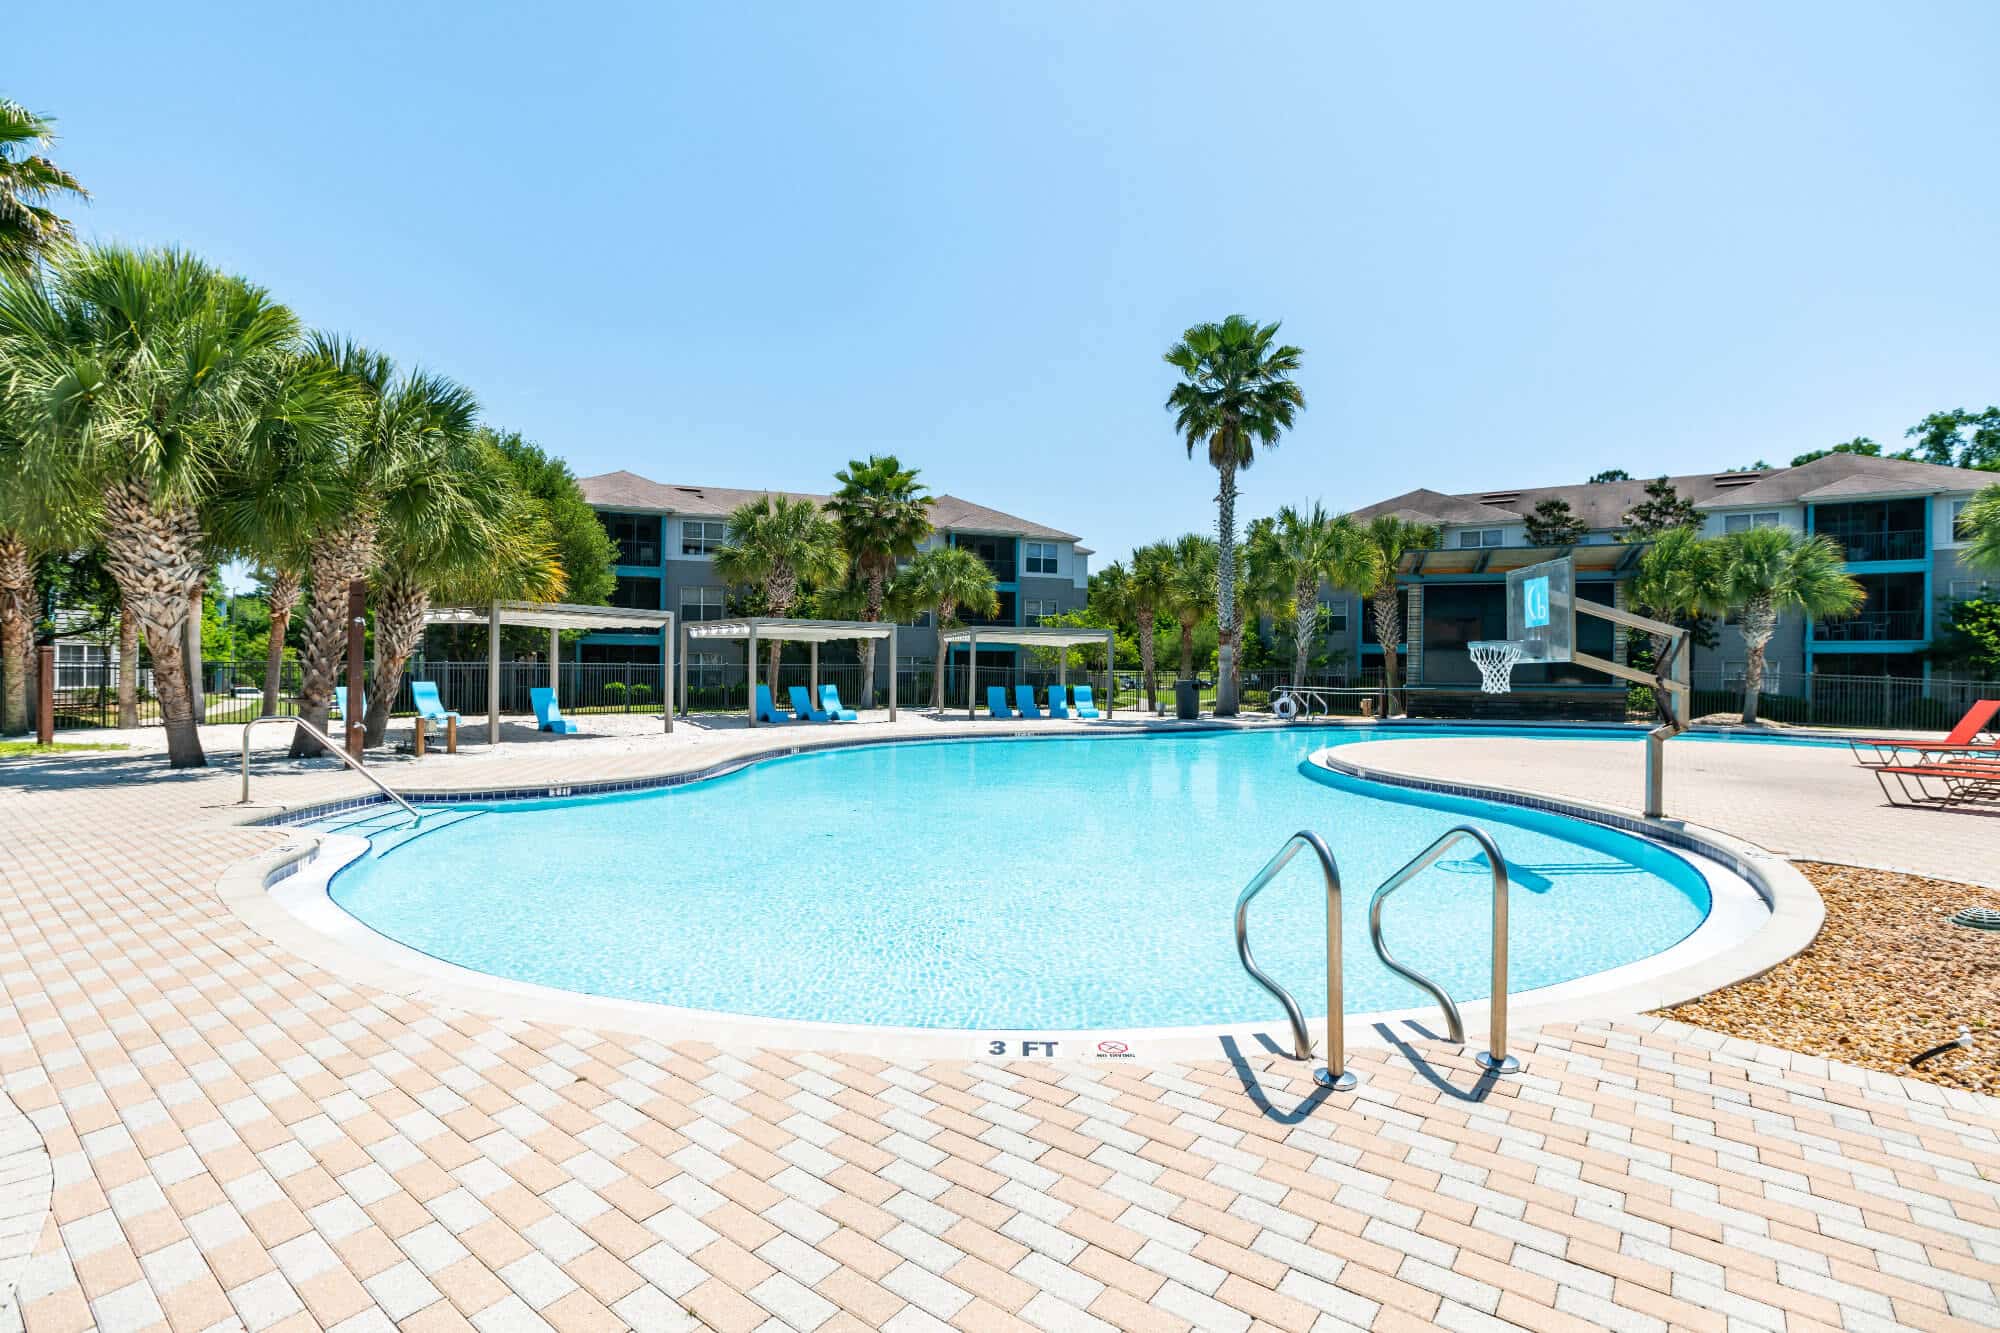 cabana beach gainesville off campus apartments naer university of florida gainesville fl resort style pool